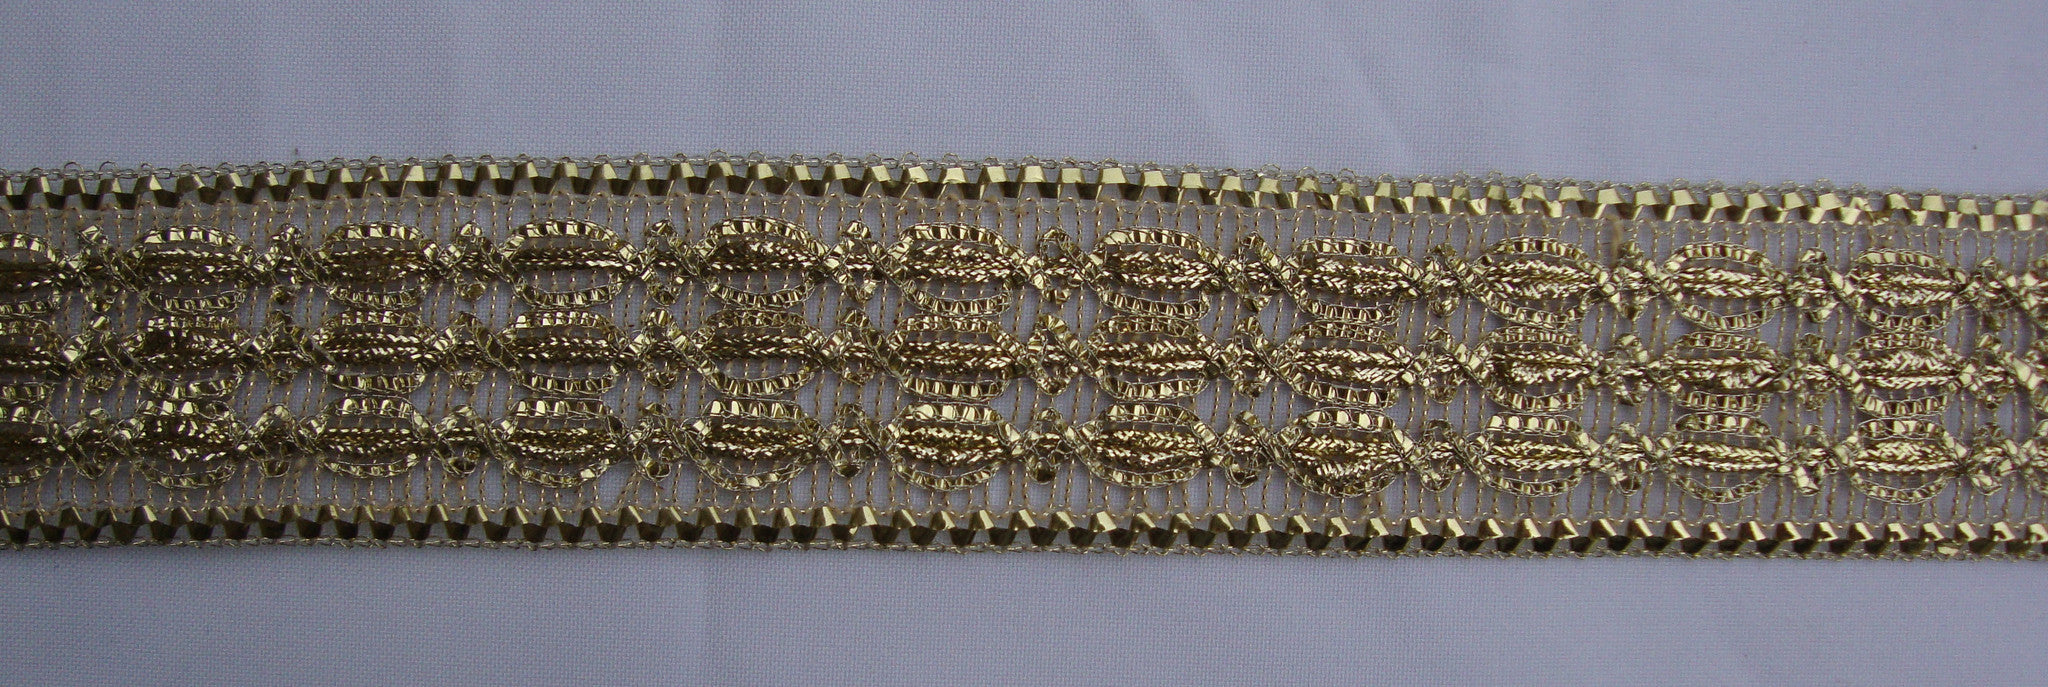 Gold Mesh Trimming (Sold as a 3 yard piece)